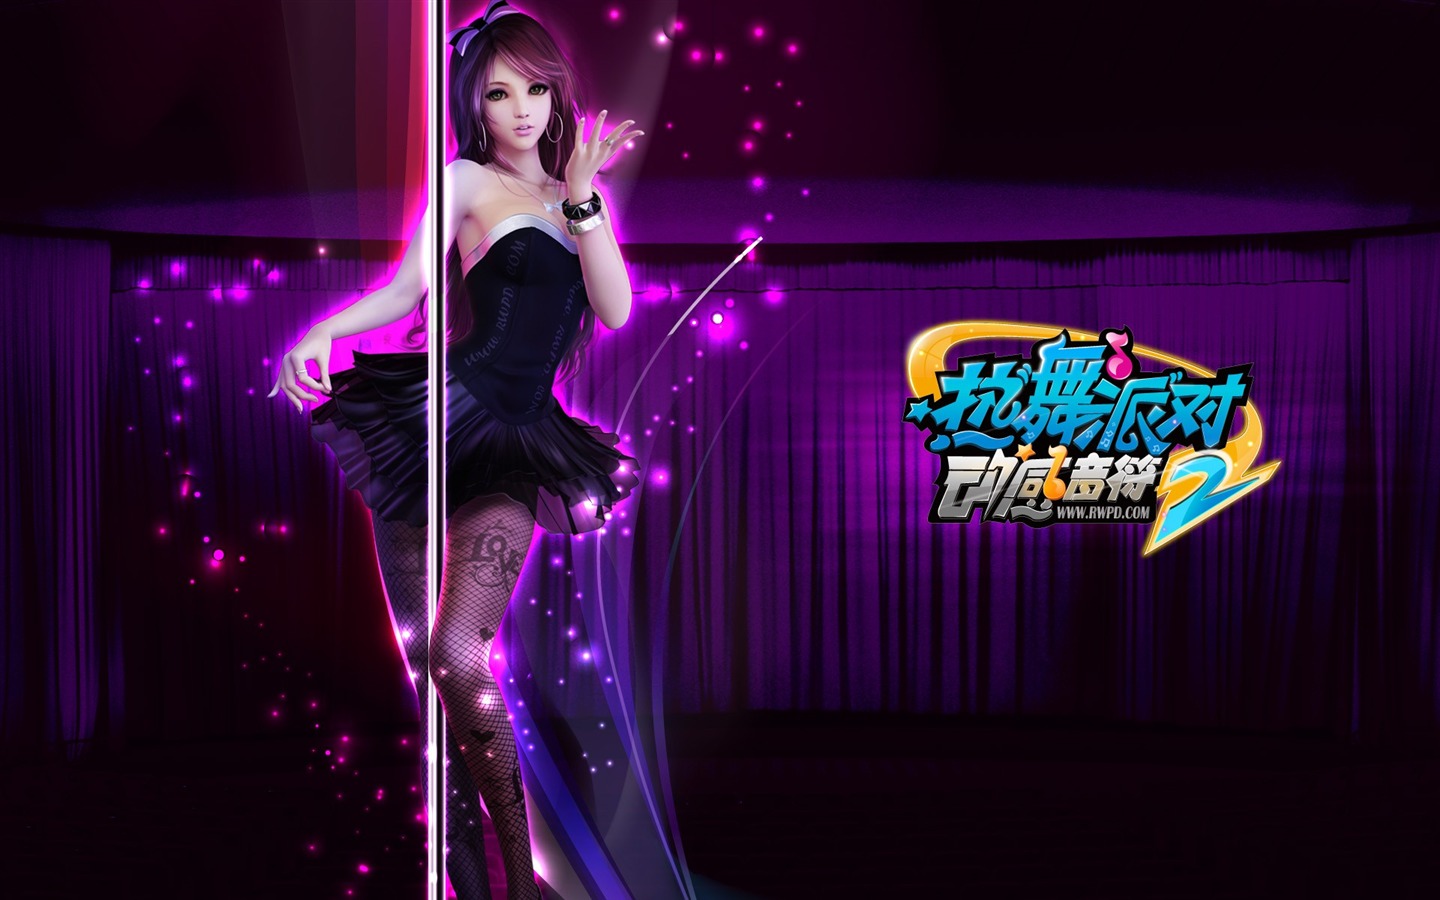 Online game Hot Dance Party II official wallpapers #30 - 1440x900